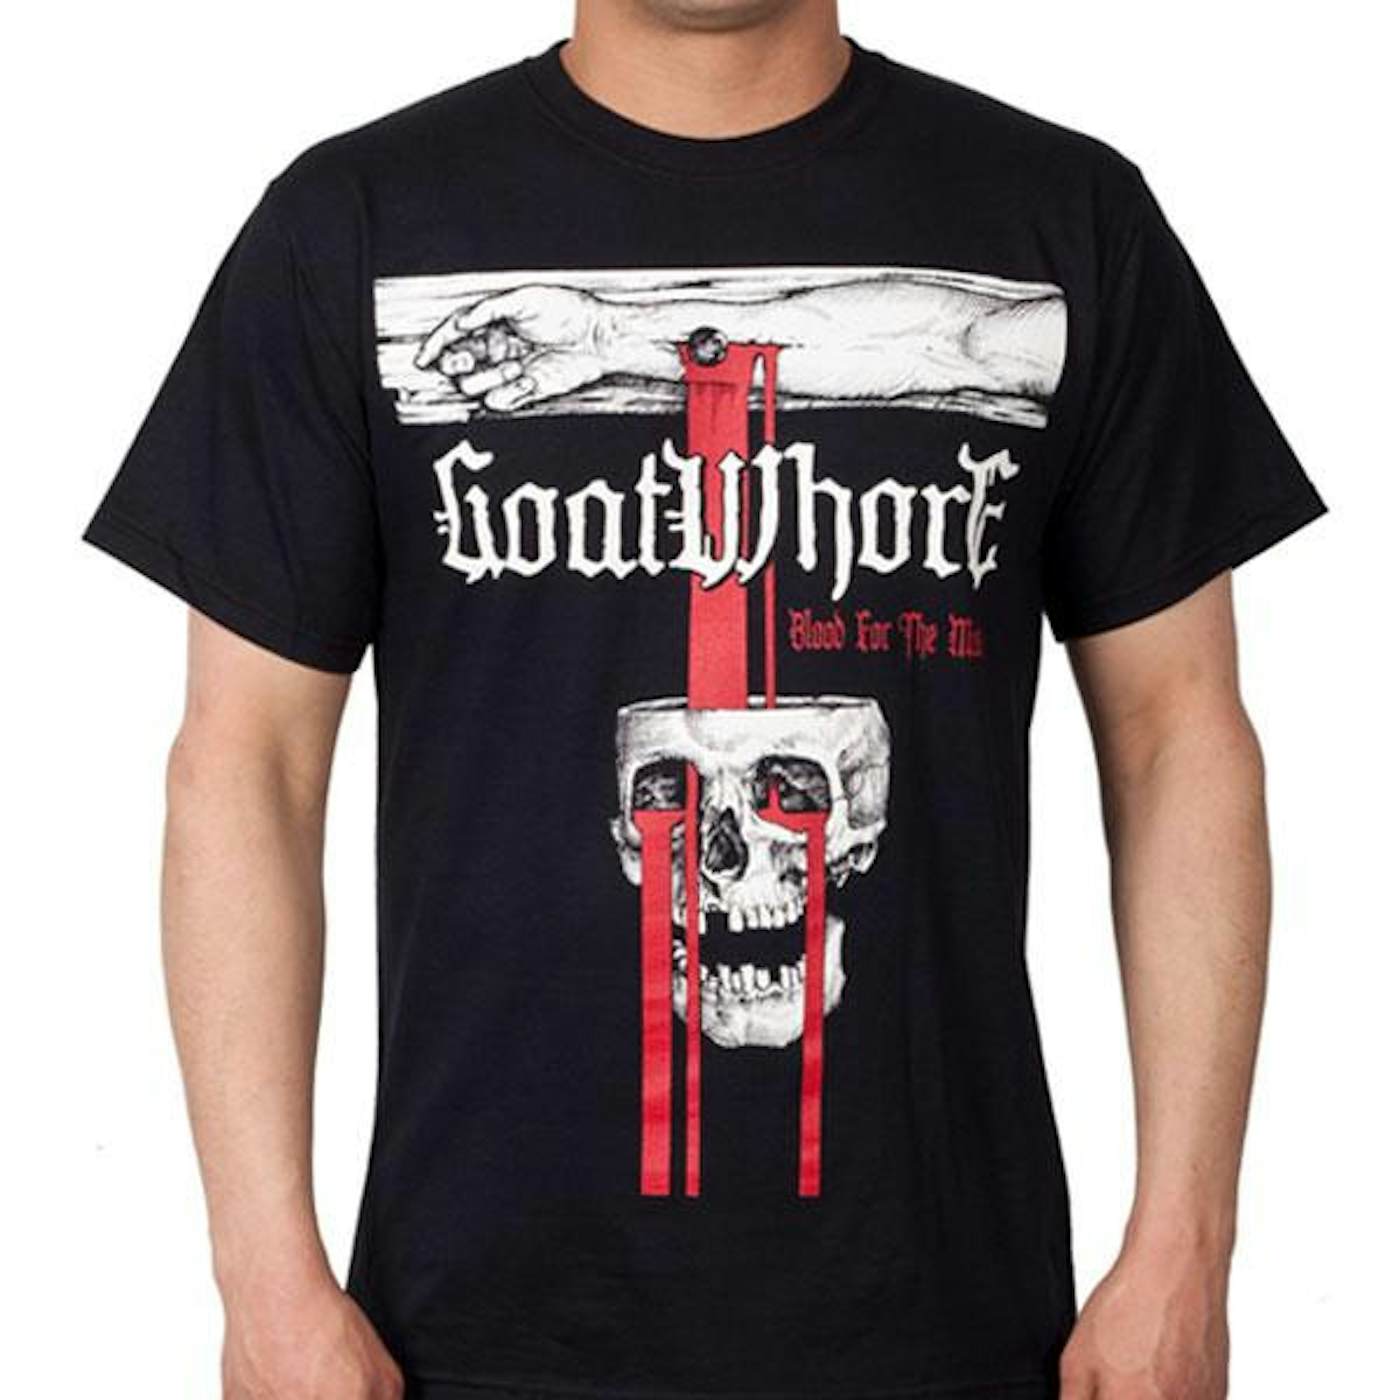 Goatwhore "Blood for the Master" T-Shirt